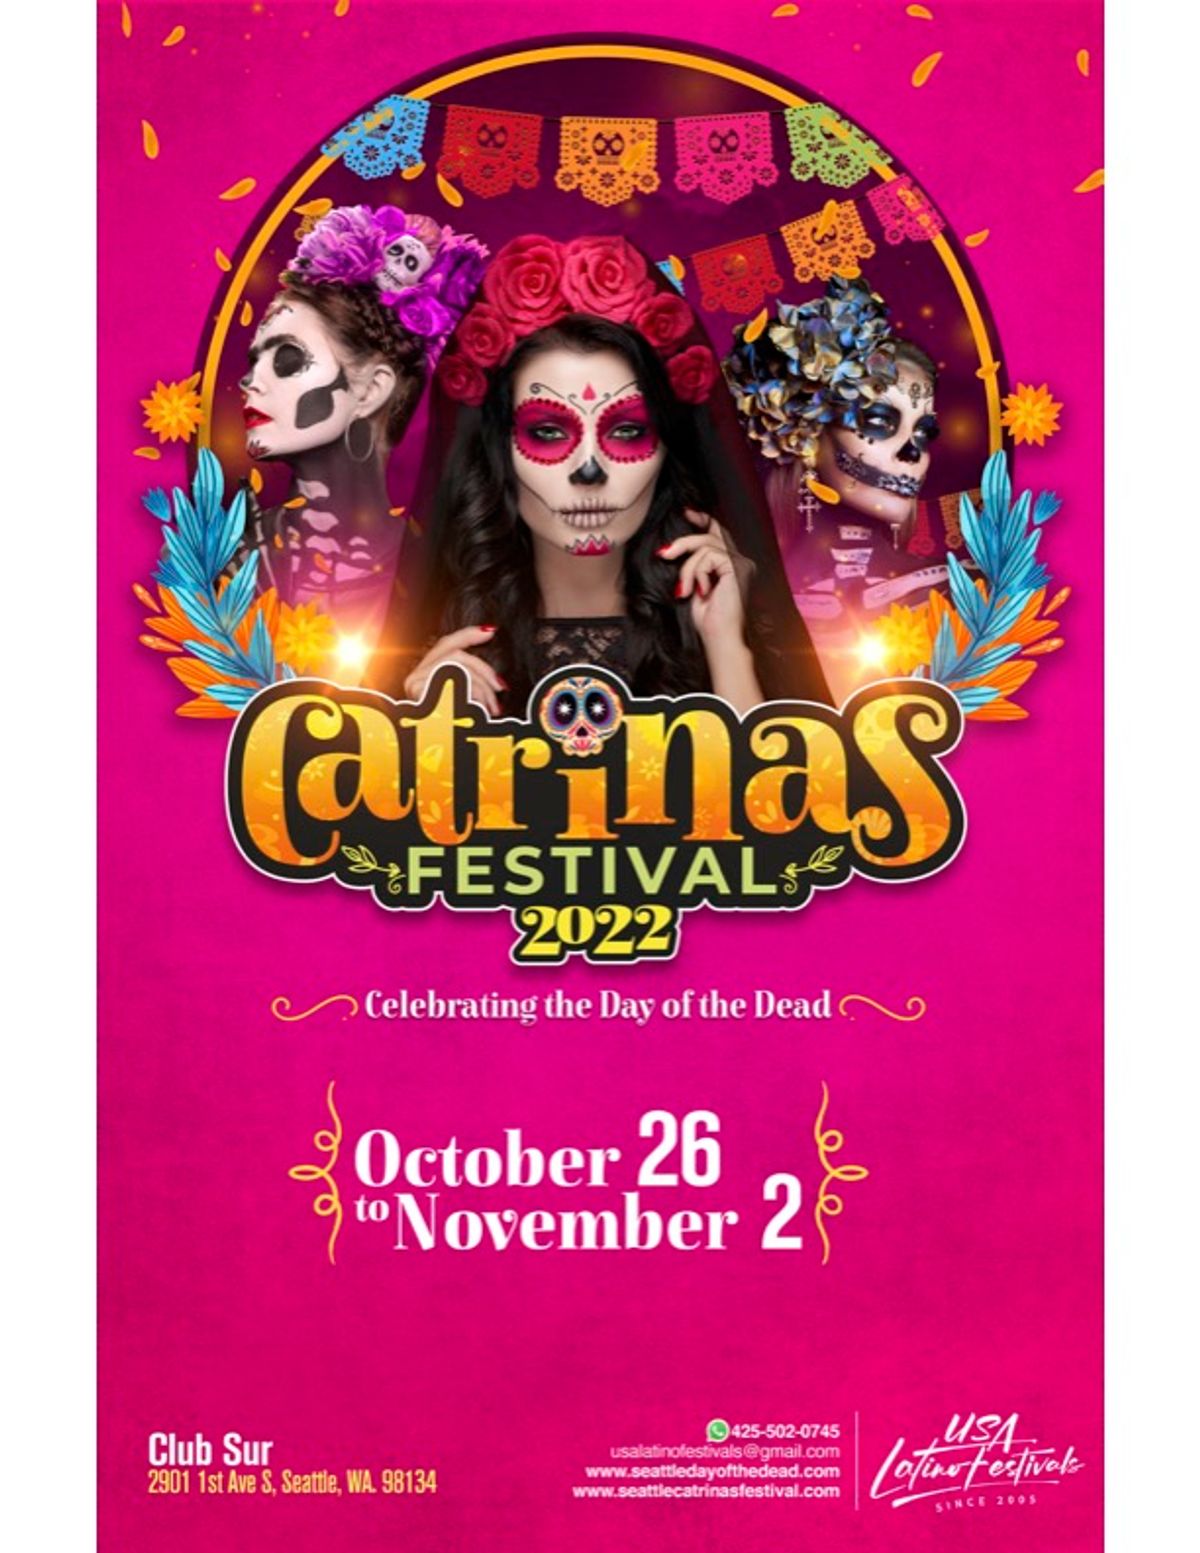 Seattle Catrinas Festival at Club Sur in Seattle, WA Every day